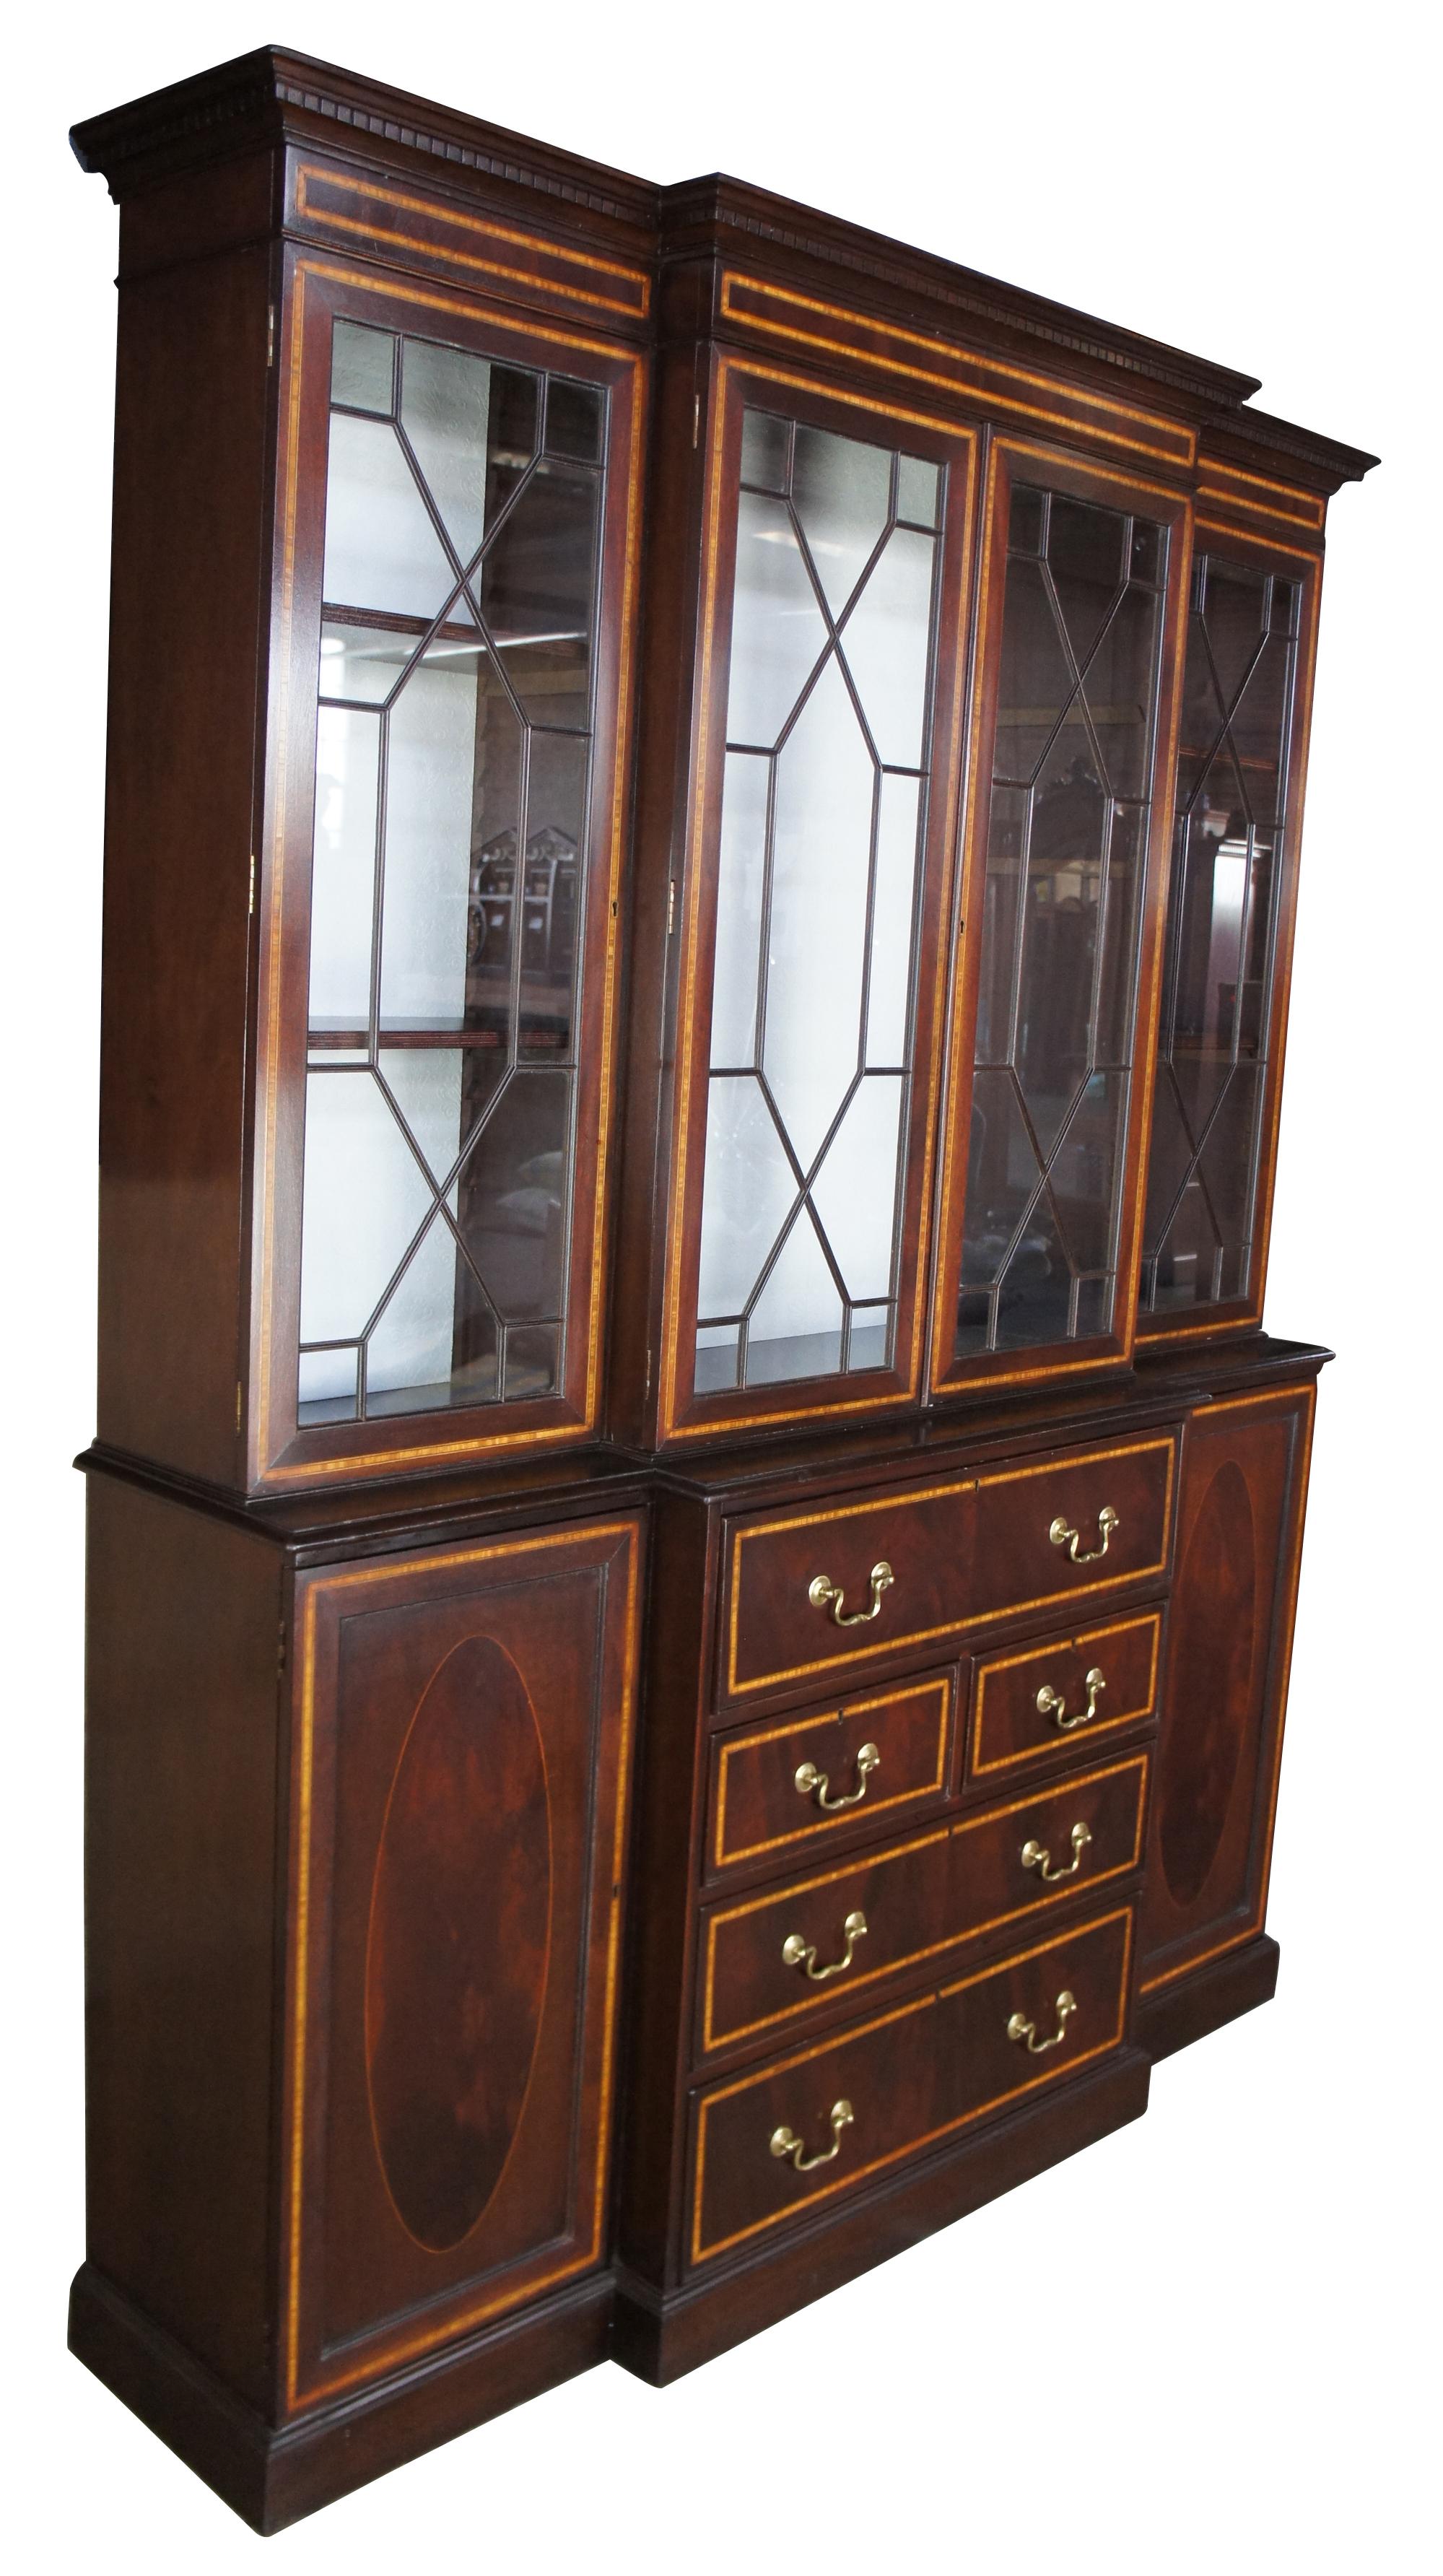 English mahogany & walnut breakfront bookcase secretary Chippendale Georgian

Custom made English breakfront. Made from mahogany with banding and walnut burled lower doors. The bookcase features fretwork over the glass doors with the interior